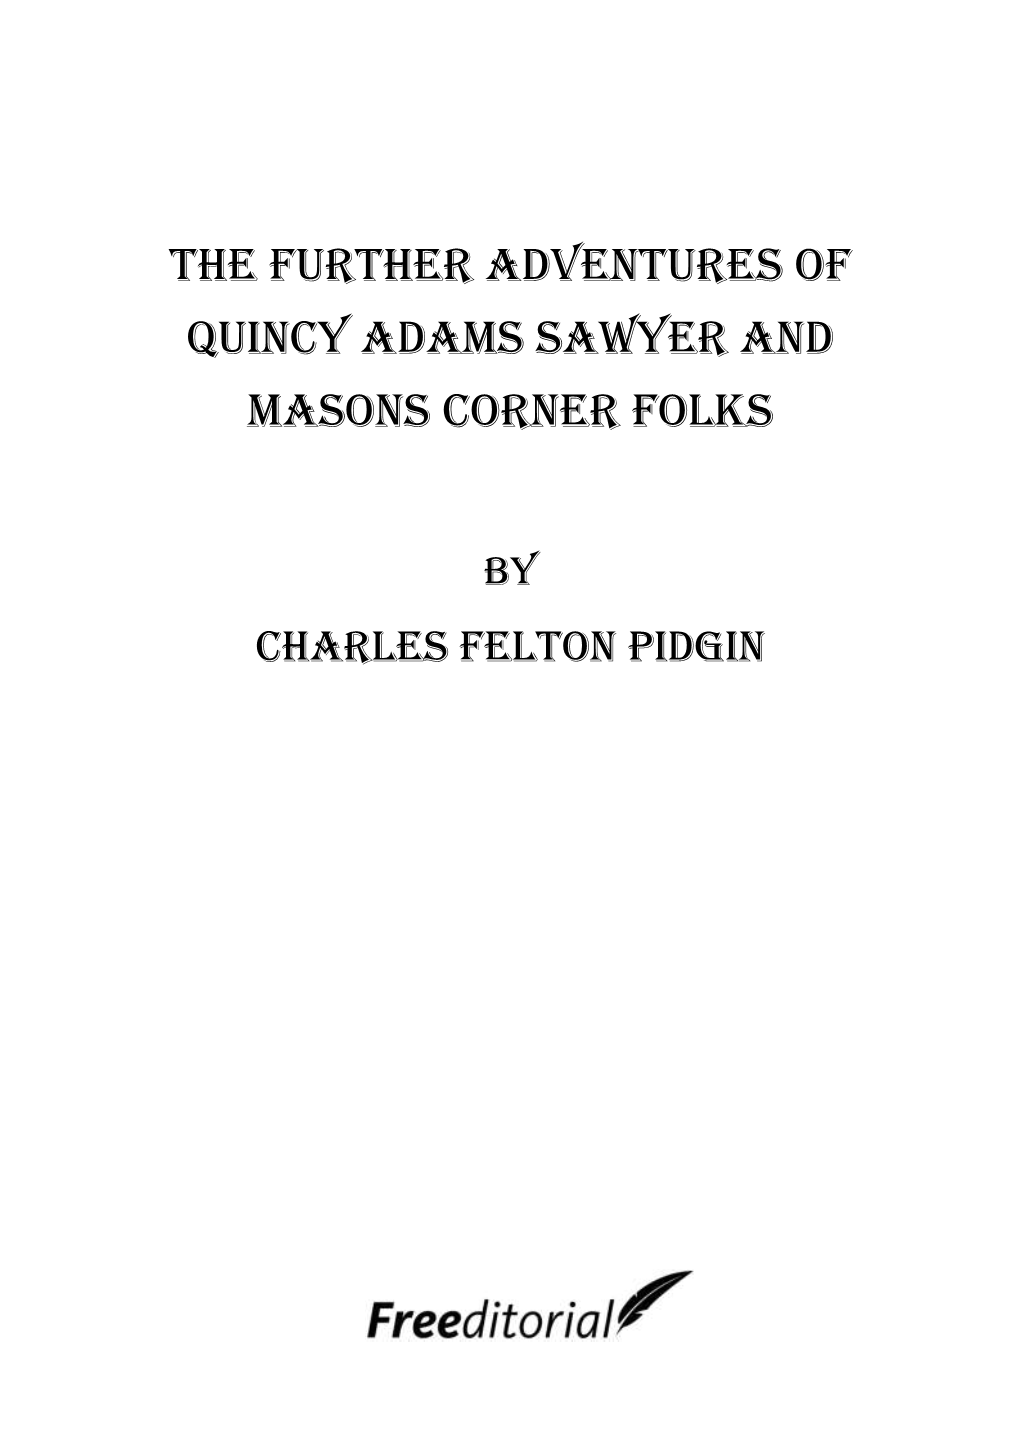 The Further Adventures of Quincy Adams Sawyer and Masons Corner Folks